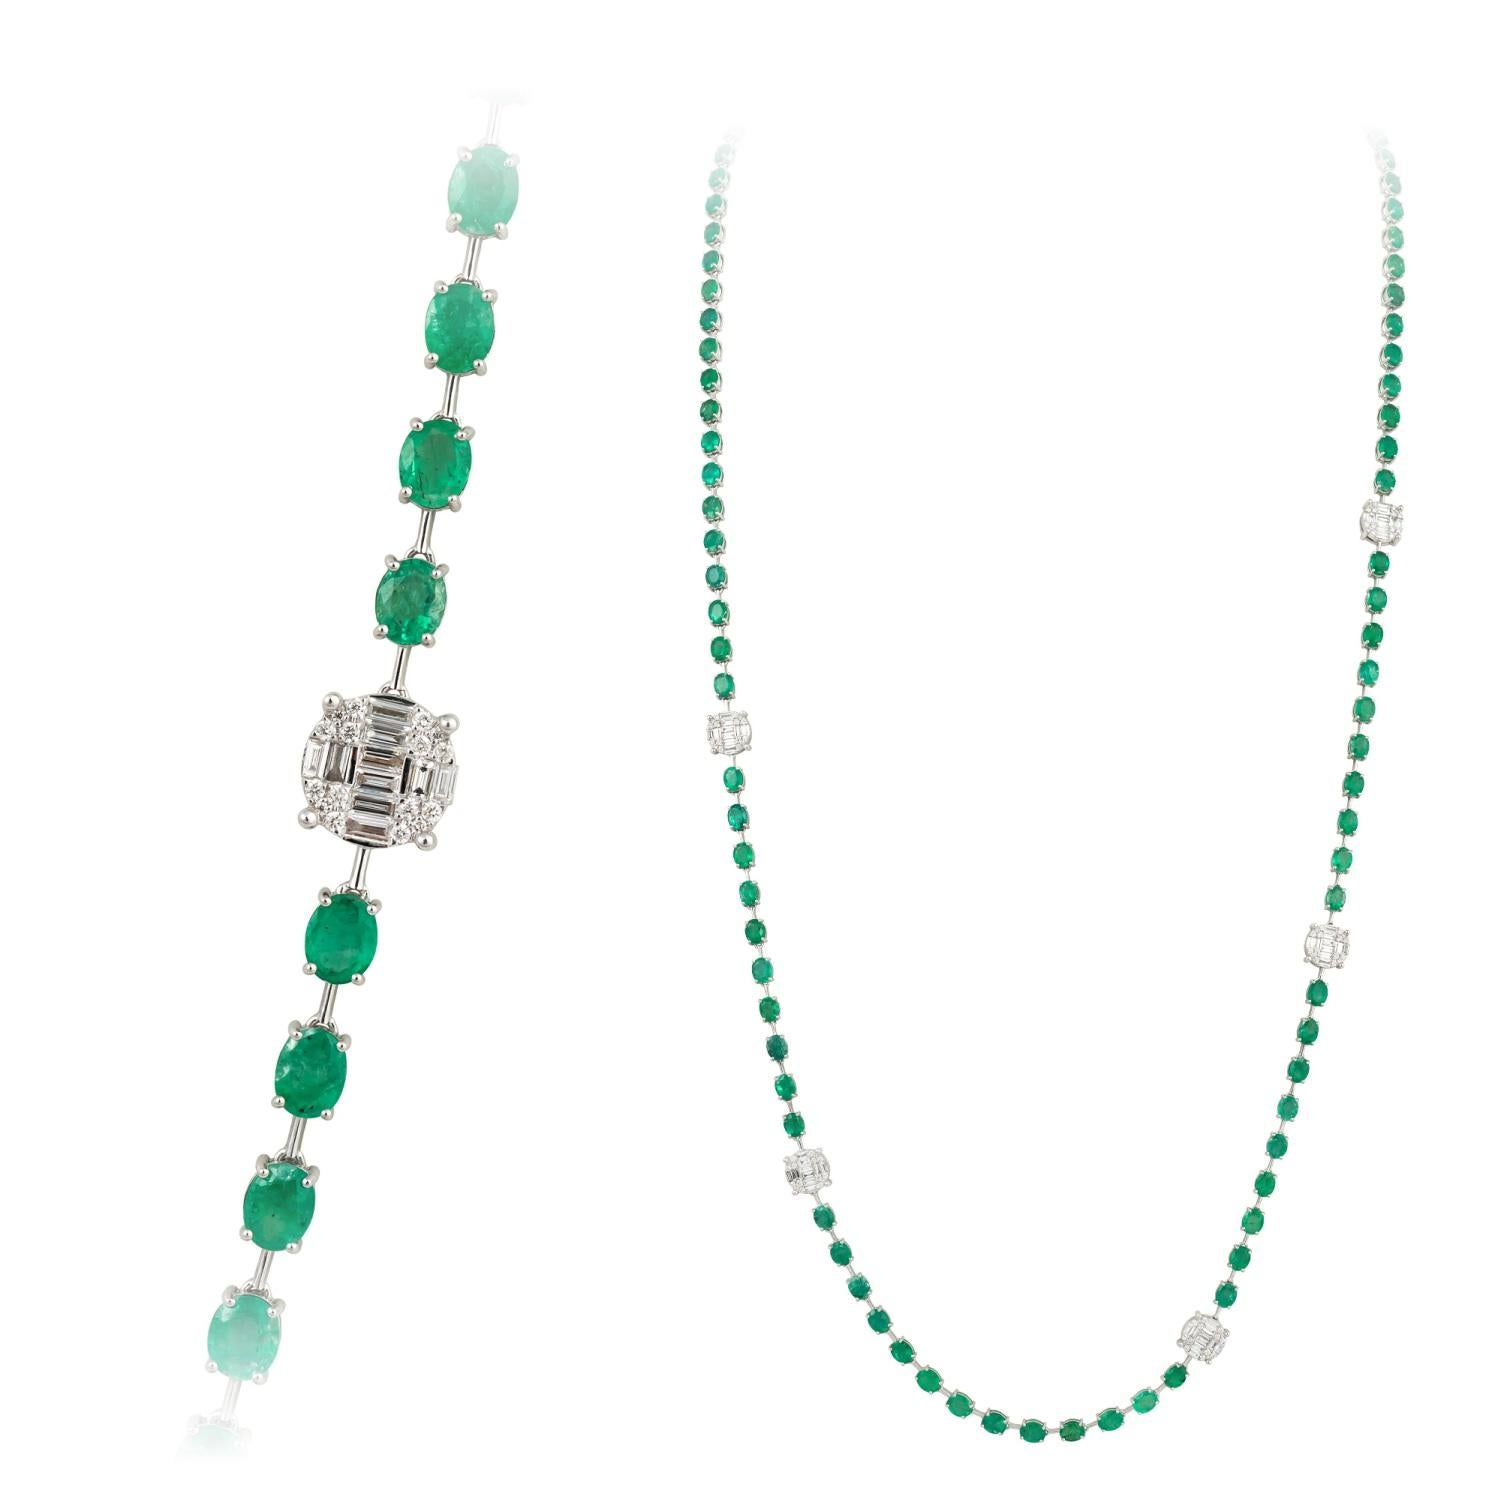 Emerald 18K White Gold Diamond Necklace
Diamond : 1.62 Cts / 130 Pcs
Emerald : 30.08 Cts / 98 Pcs

Total Necklace Weight: 27,6 Grams
Necklace Length: 81 cm 


With a heritage of ancient fine Swiss jewelry traditions, NATKINA is a Geneva-based